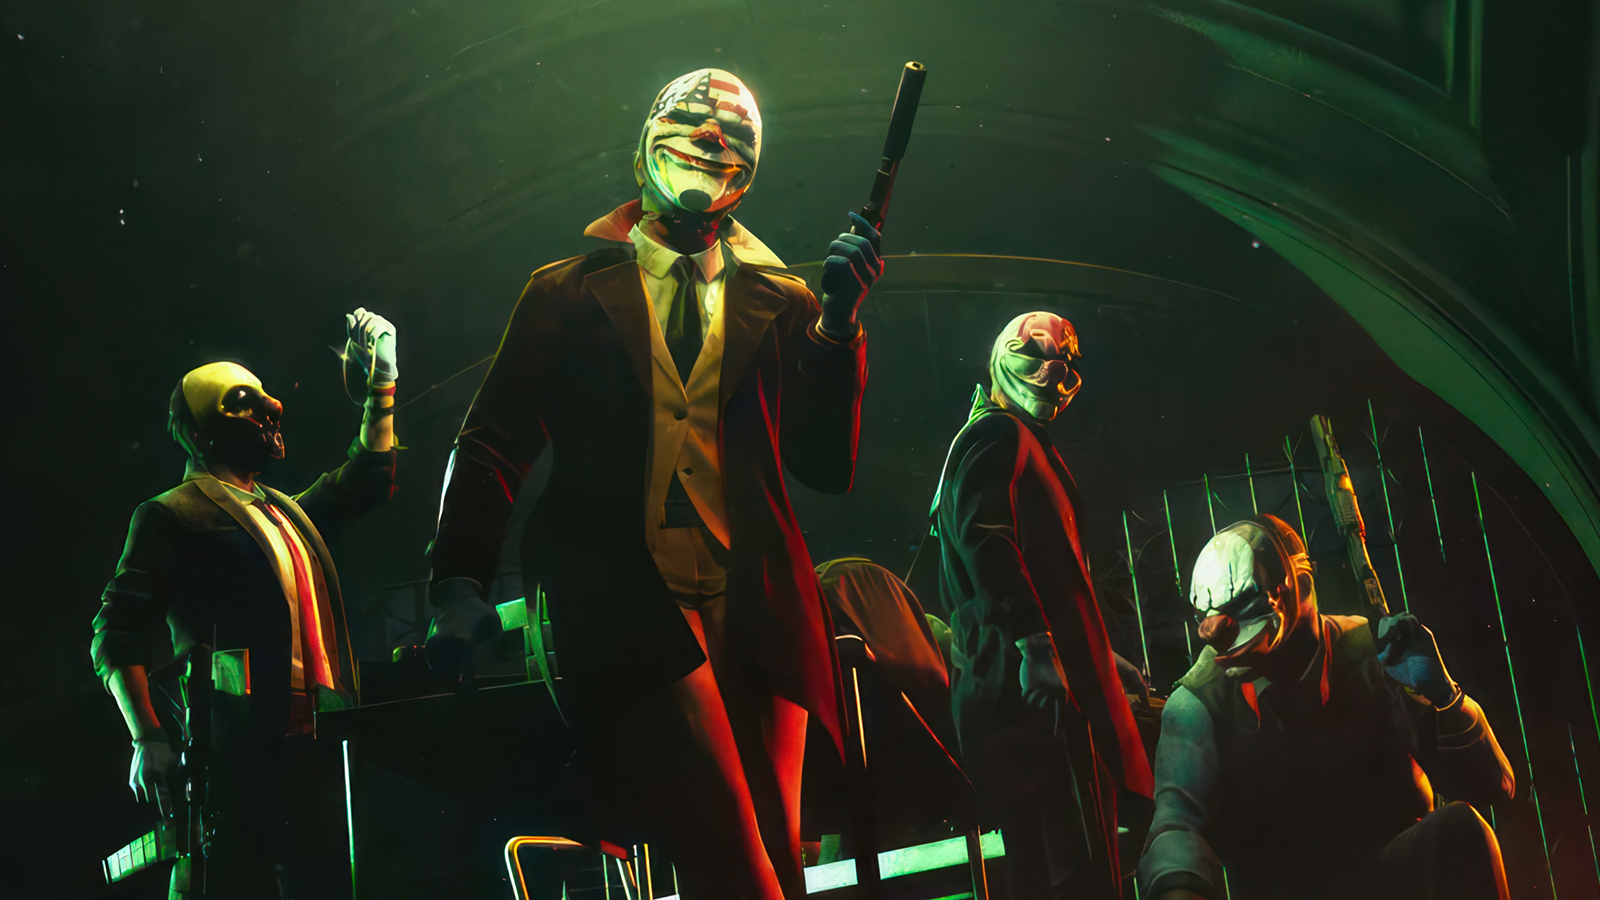 Payday 3 is 14 days away and the devs have already revealed a full year's  worth of DLC